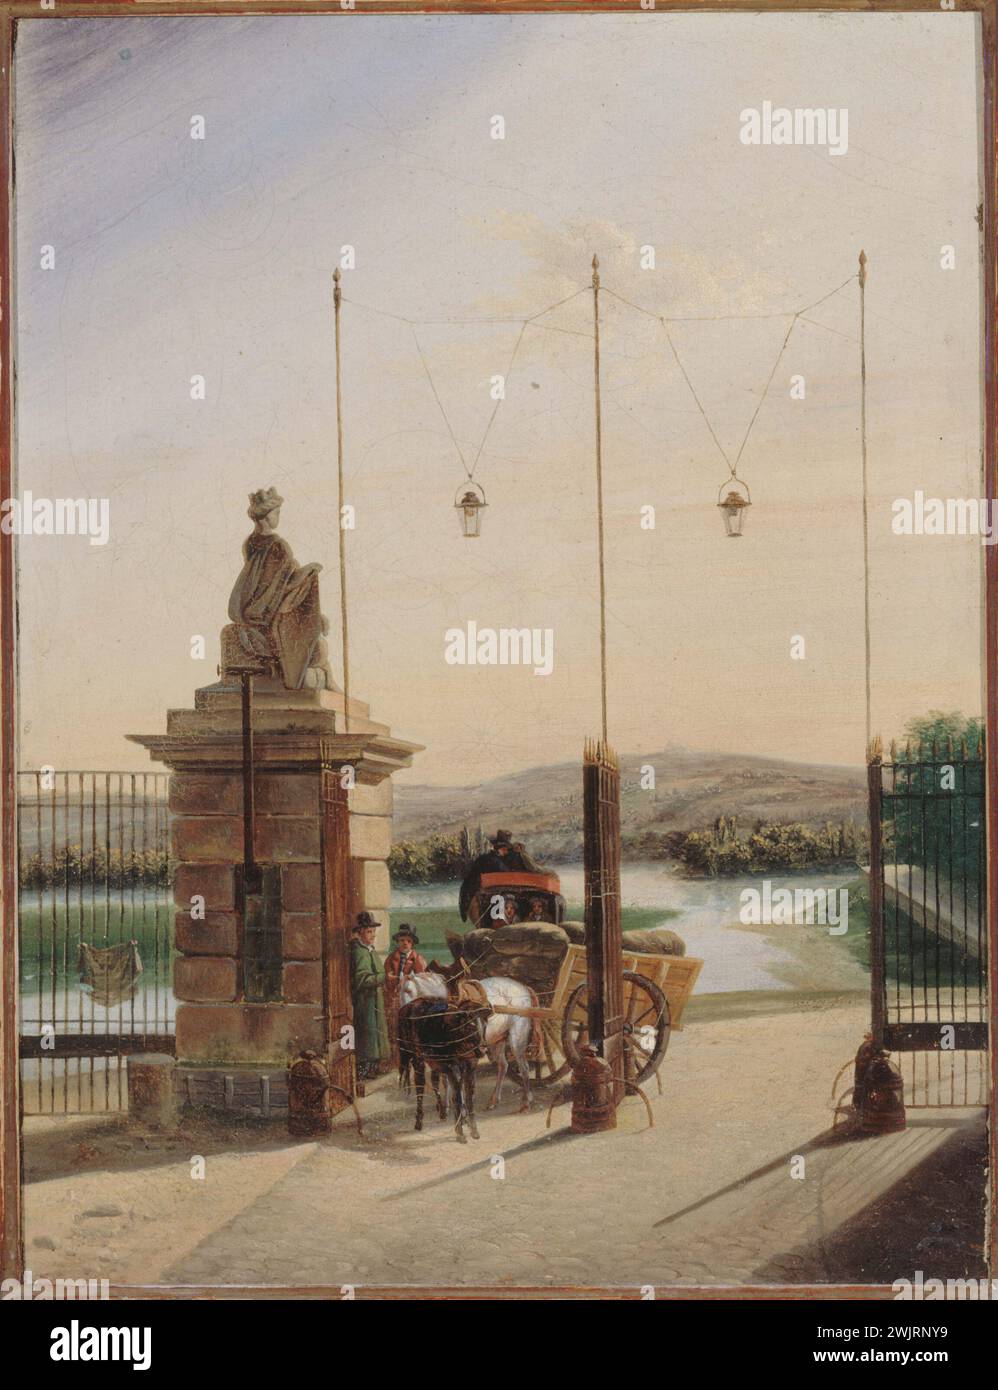 The Porte des Bonhommes in Passy ', around 1820. Anonymous, oil on canvas. Paris, Carnavalet museum. 24169-9 Barriere, campaign, cart, control, control, public lighting, entry, grid, tax, goods, goods, granting, work of art, passage, pay, good men, separation, separate, table, tax, transport of goods, Horse car, town, 19th 19th XIX 19th 19th 19th century, 16th 16th 16th 16th 16th 16th arrondissement, oil on canvas Stock Photo